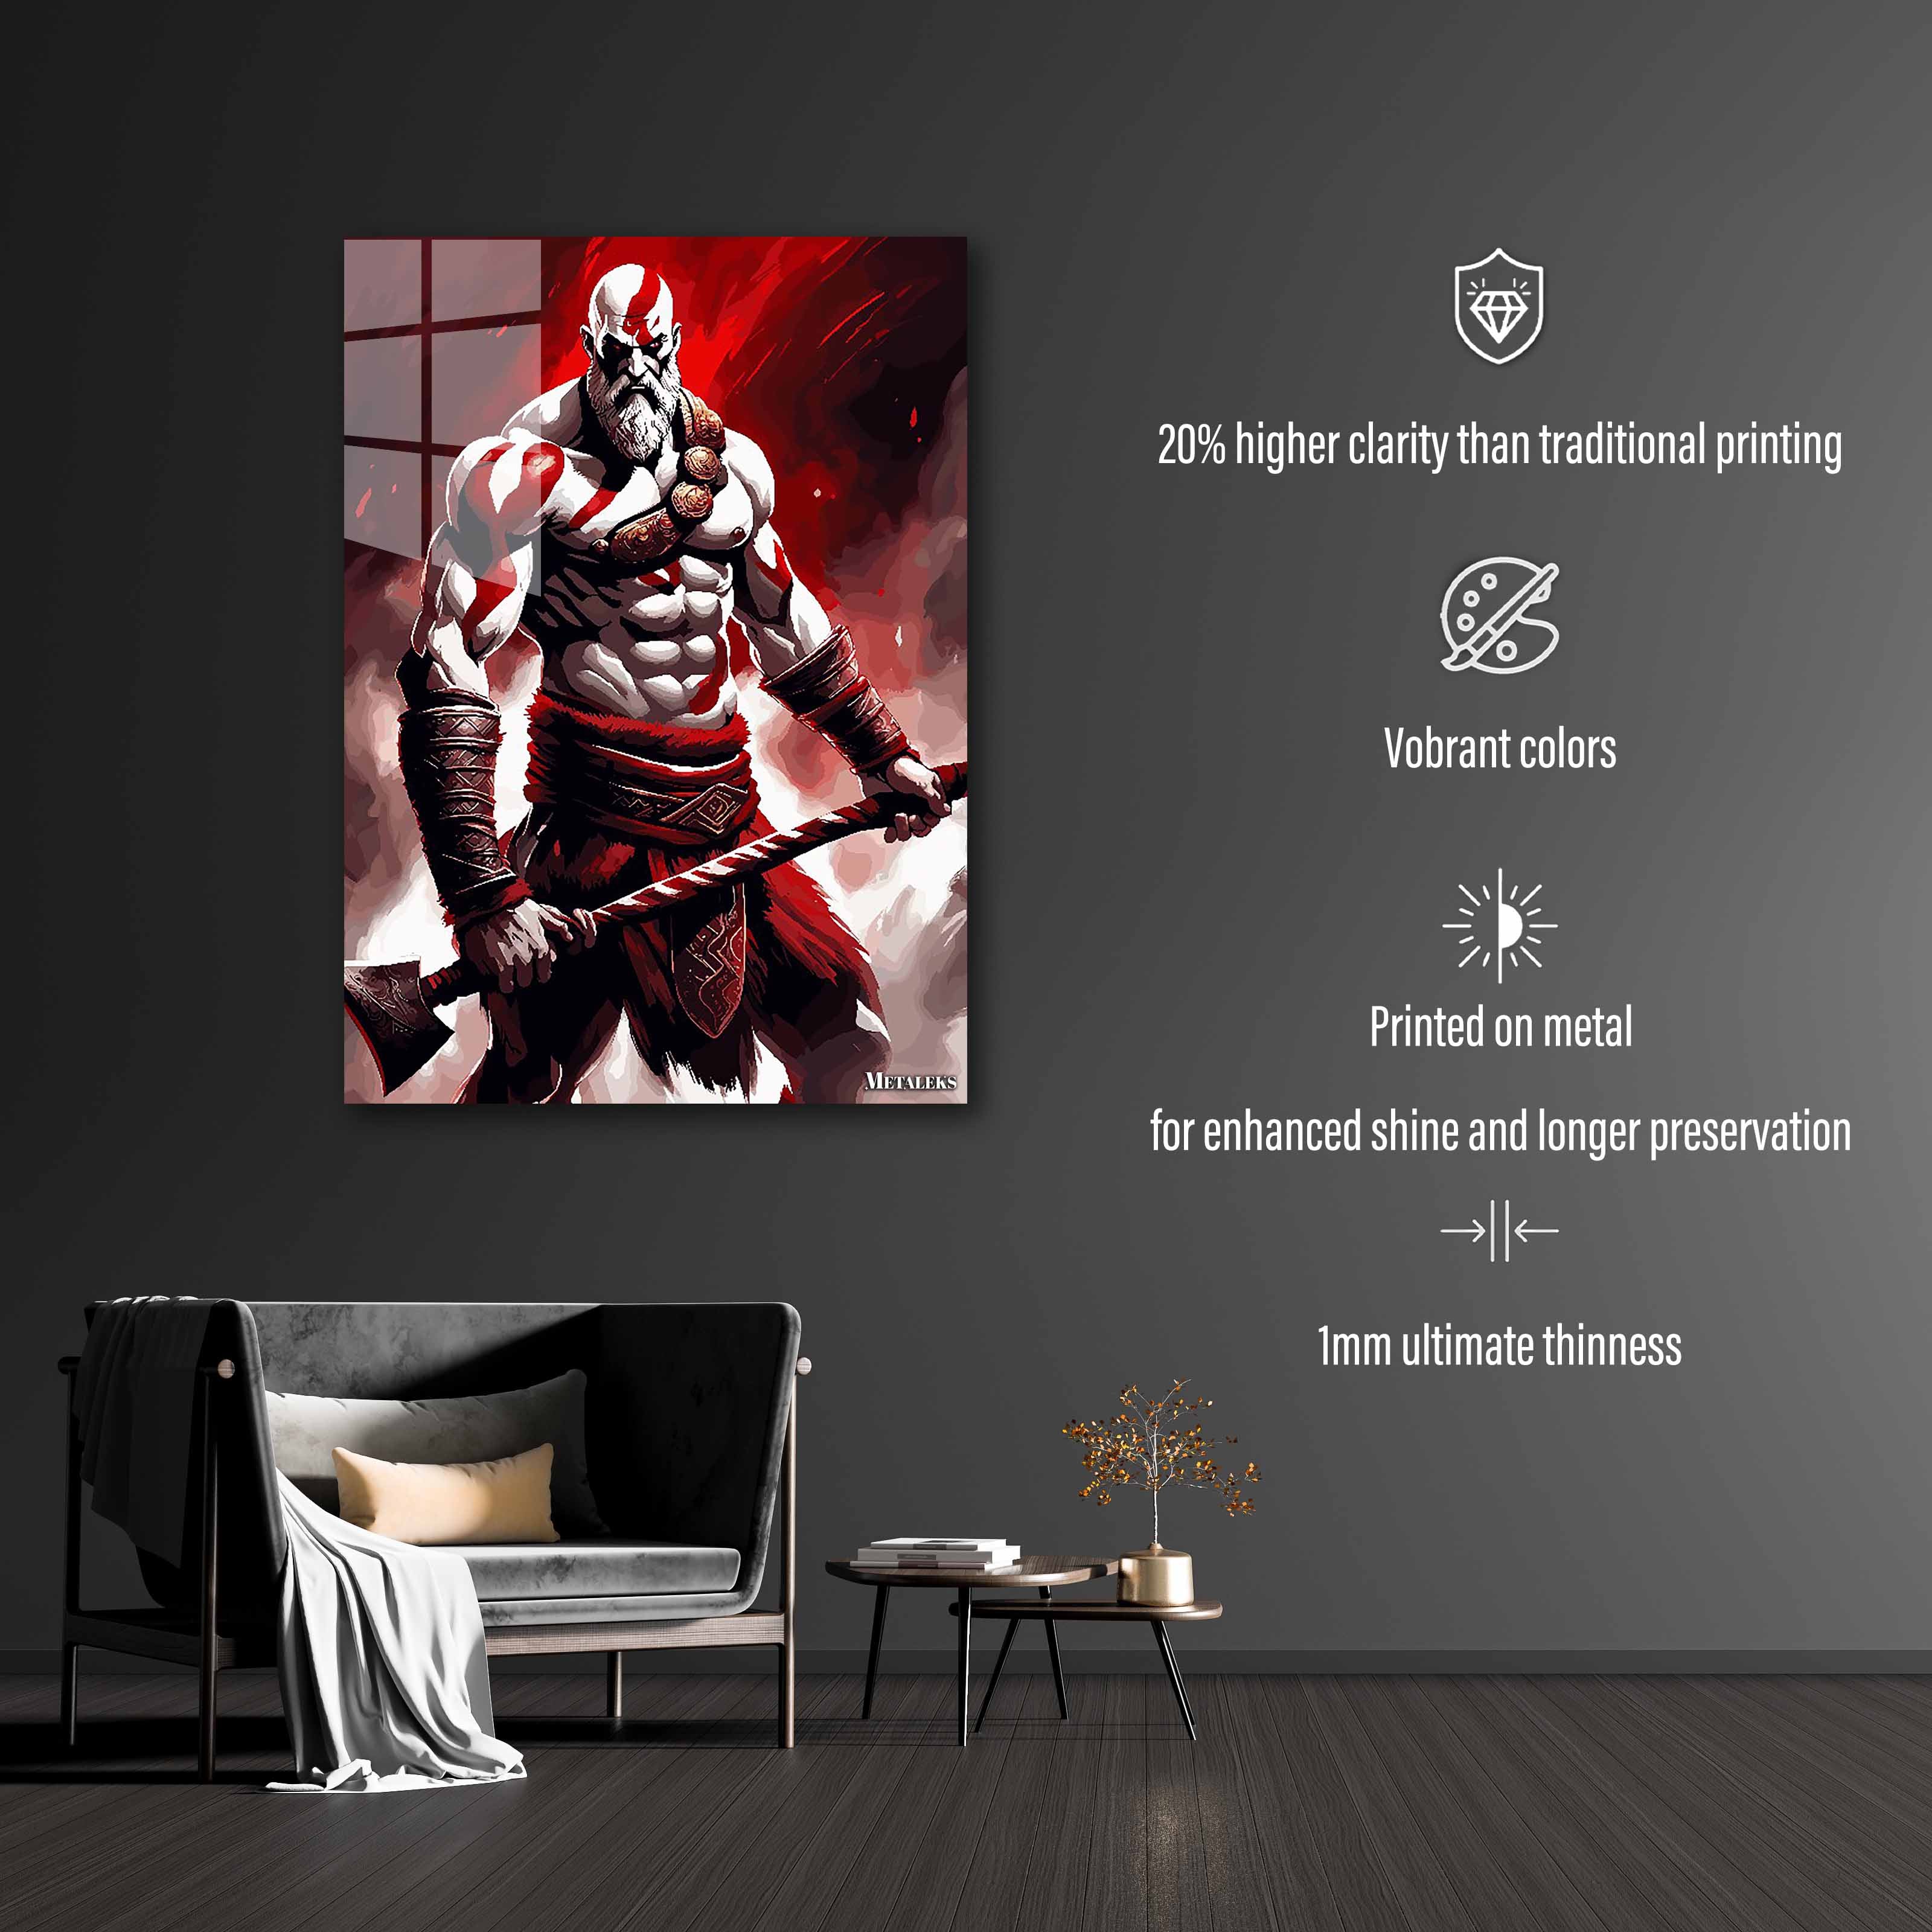 Kratos The God of War-designed by @ALTAY